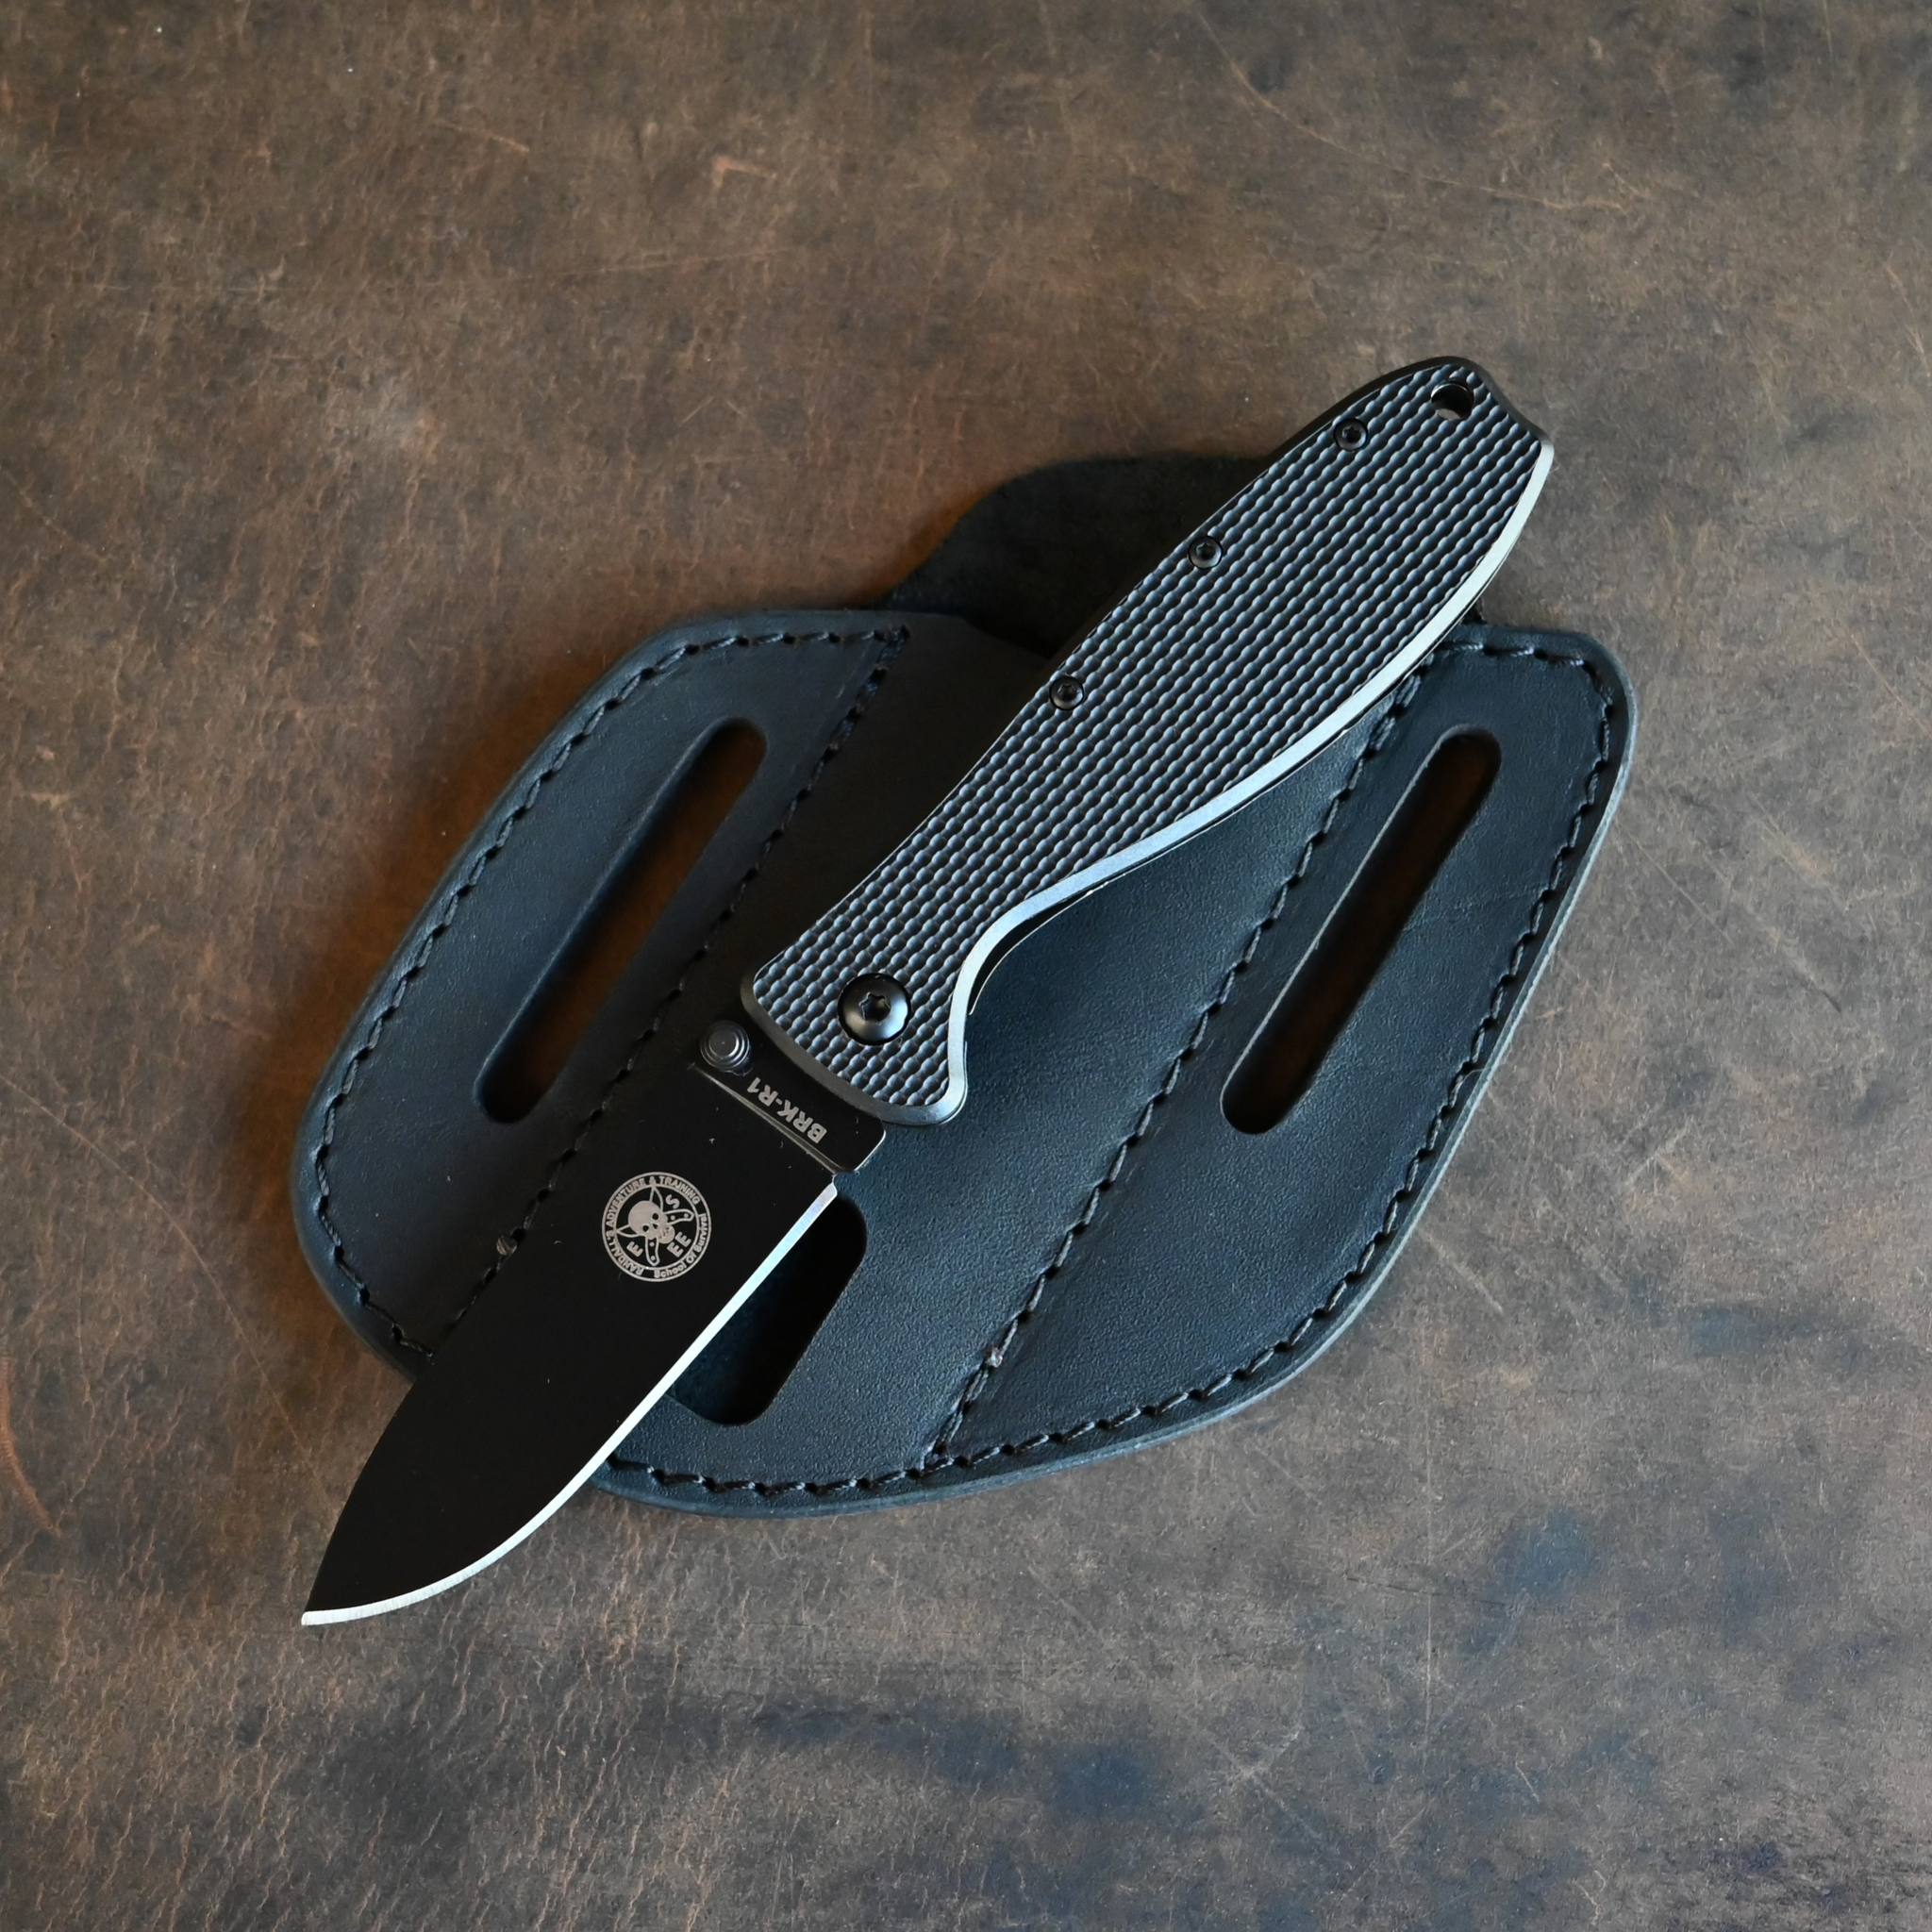 Esee D2 Zancudo w/ Small Canted Pancake Holster Bundle